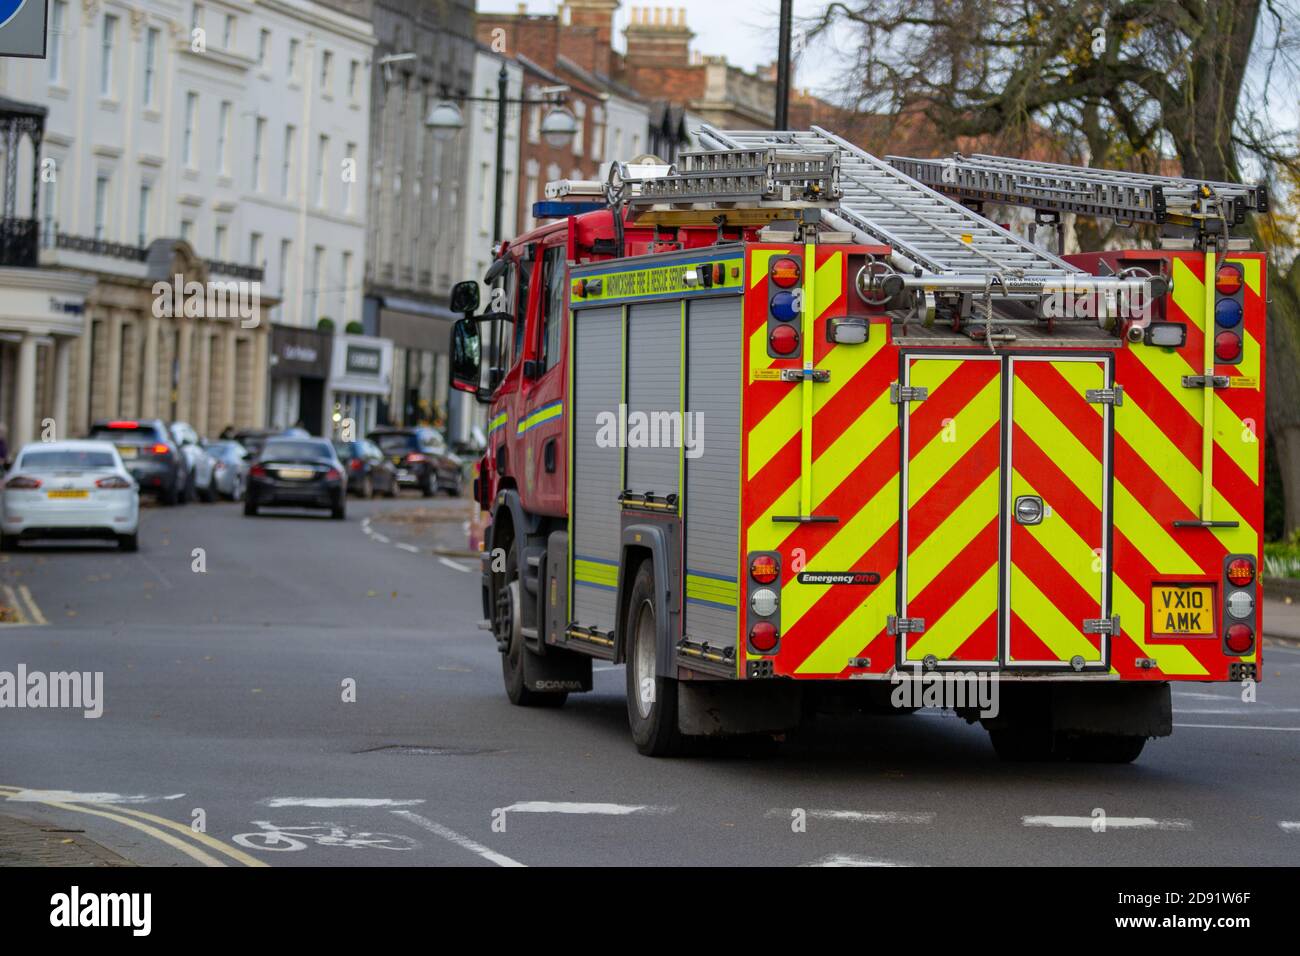 Warwickshire Fire and Rescue Service engine in Leamington Spa Stock Photo